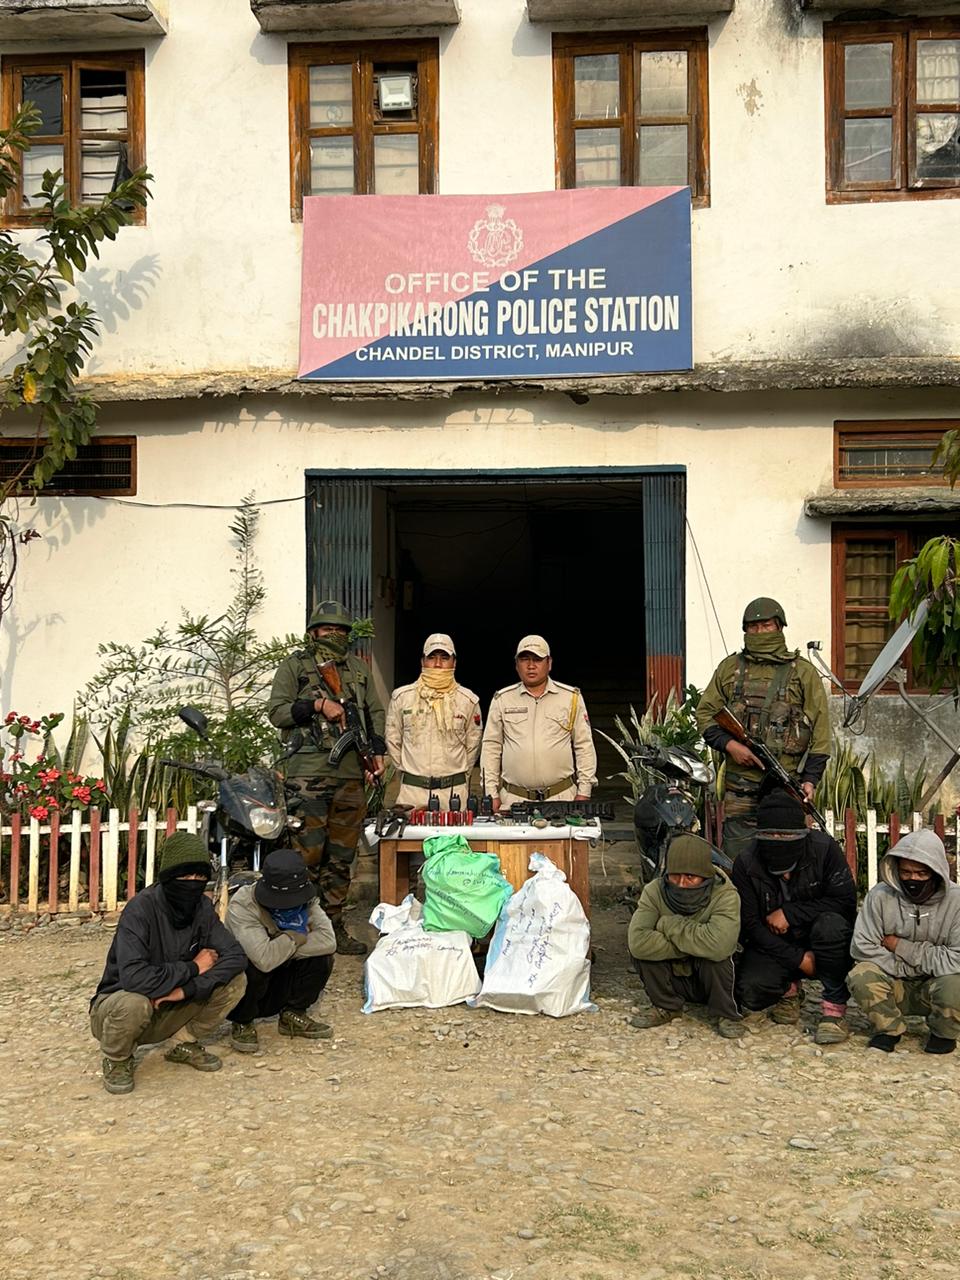 five-suspected-militants-arrested-from-along-indo-myanmar-border-drugs-arms-seized